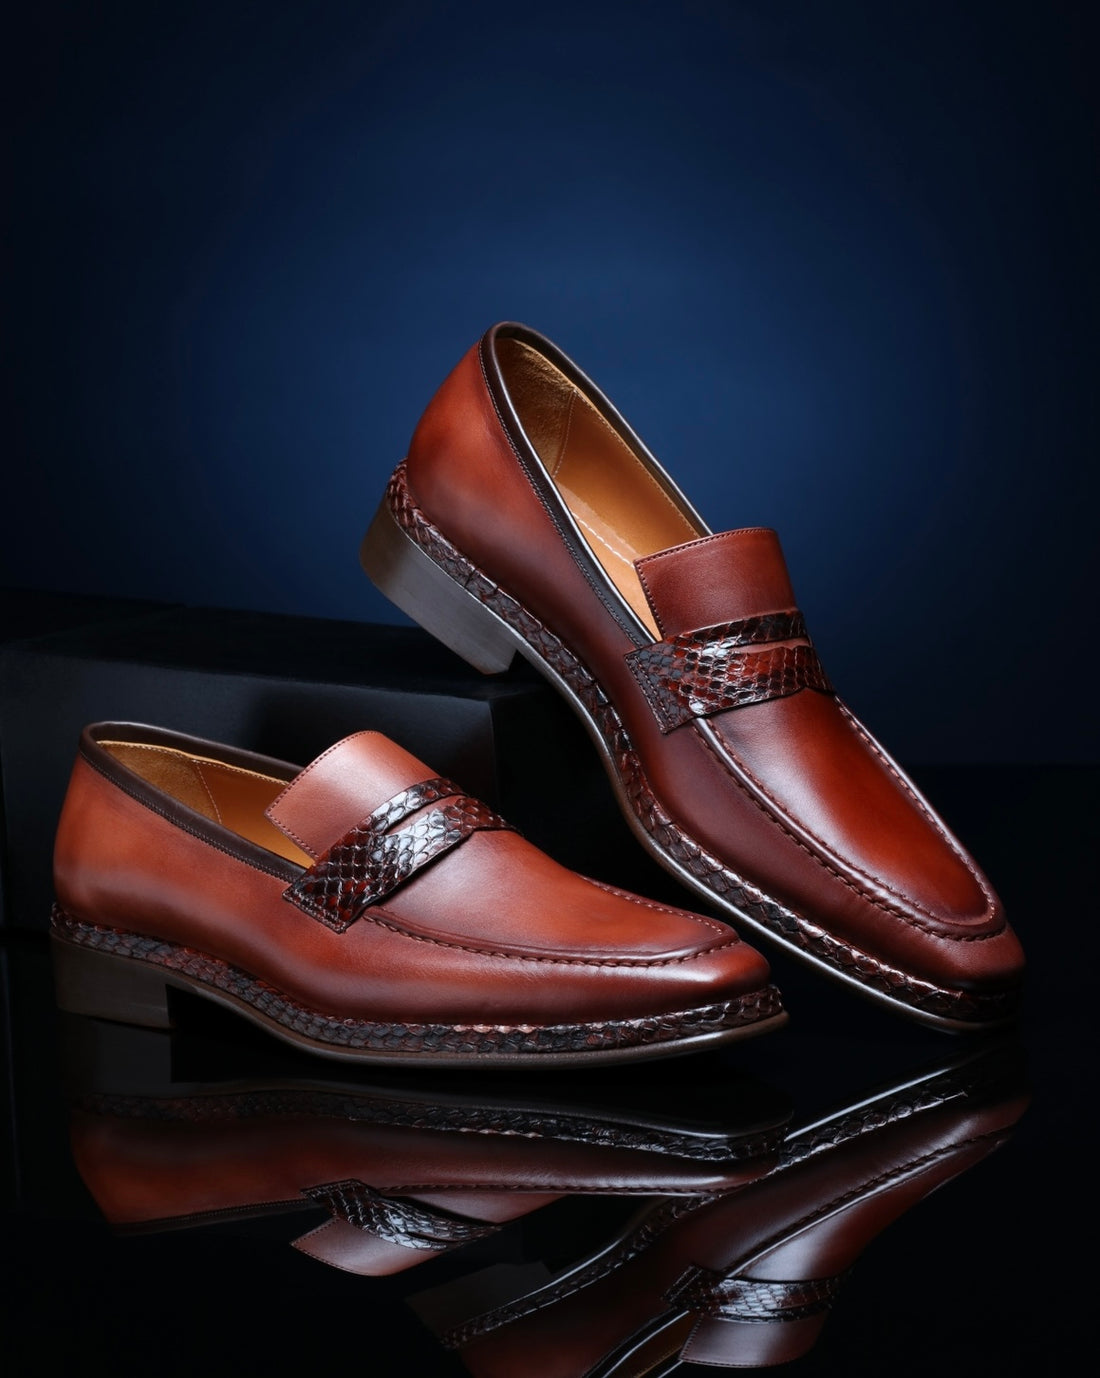 Penny Loafers Python Skin - Cognac